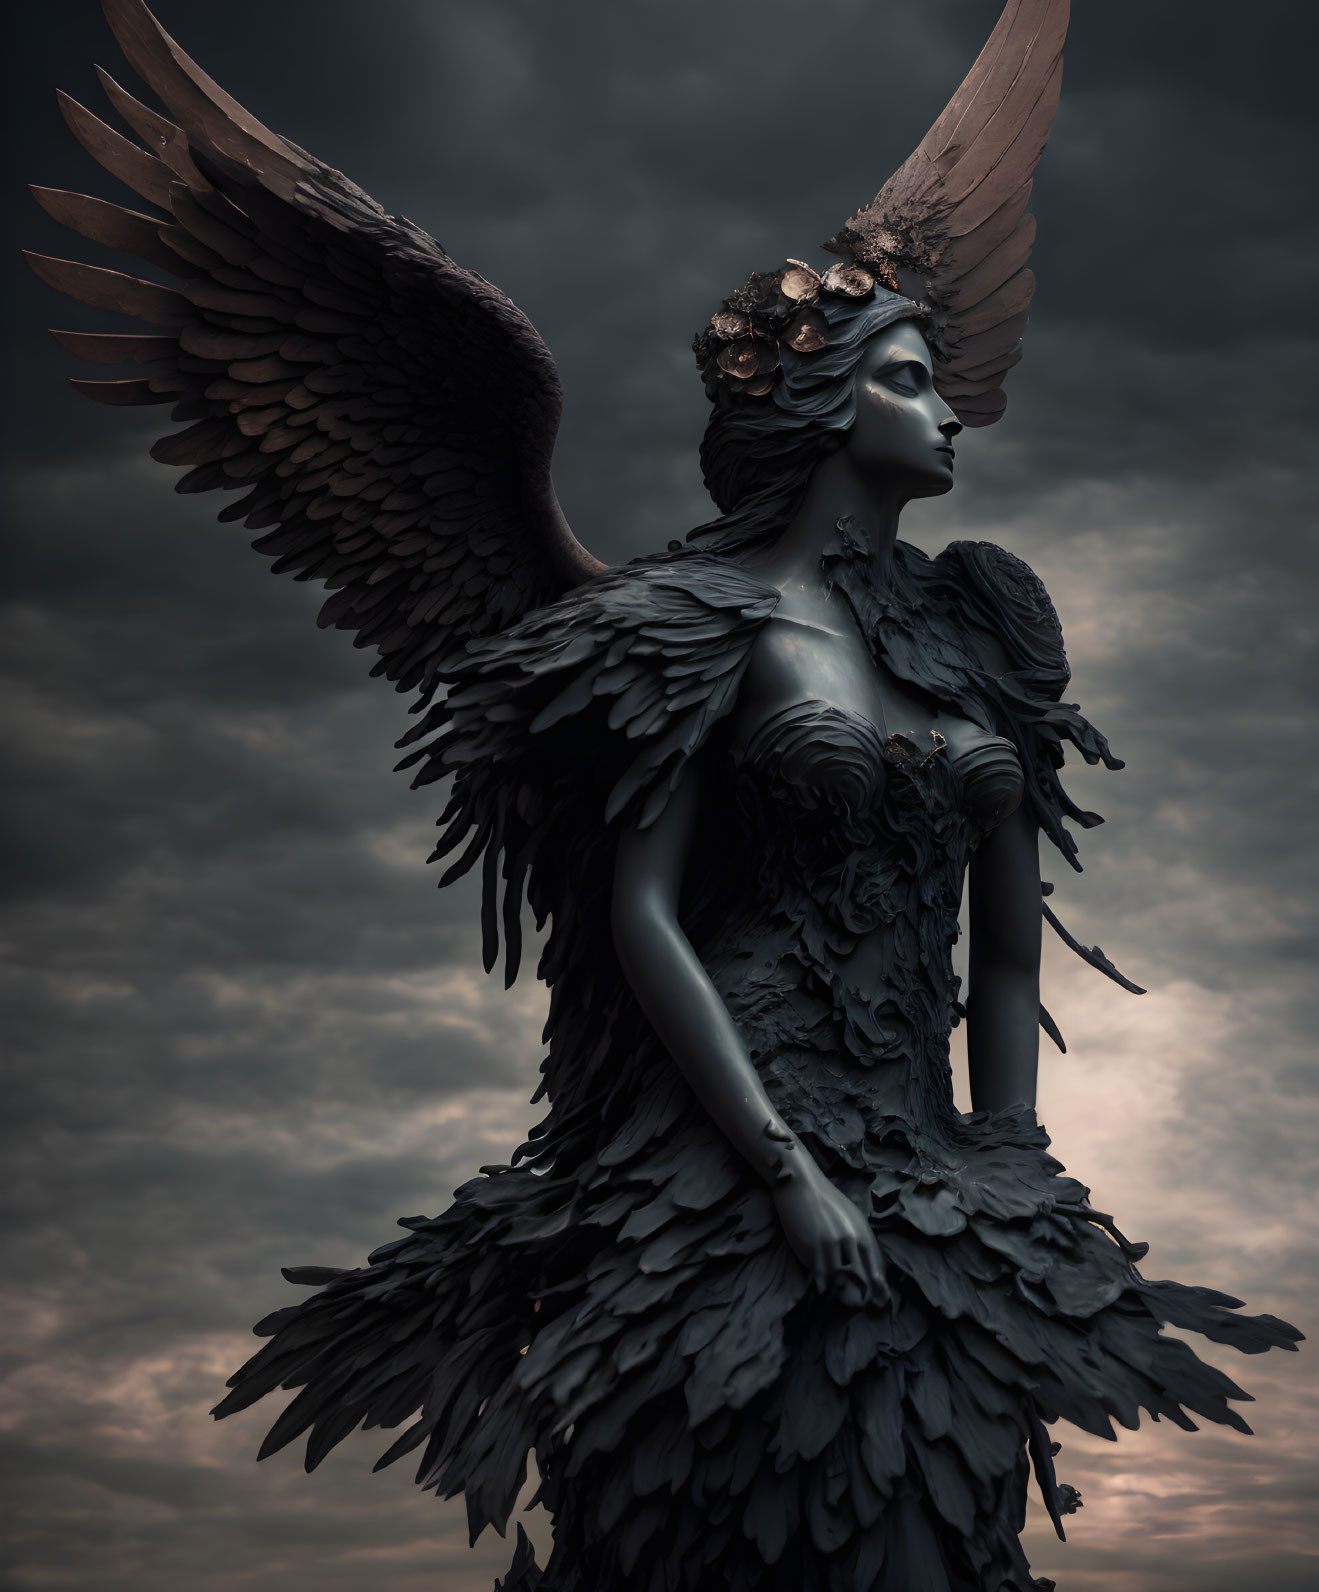 Dark Angel Wings Character with Feathered Costume and Headpiece Against Moody Sky